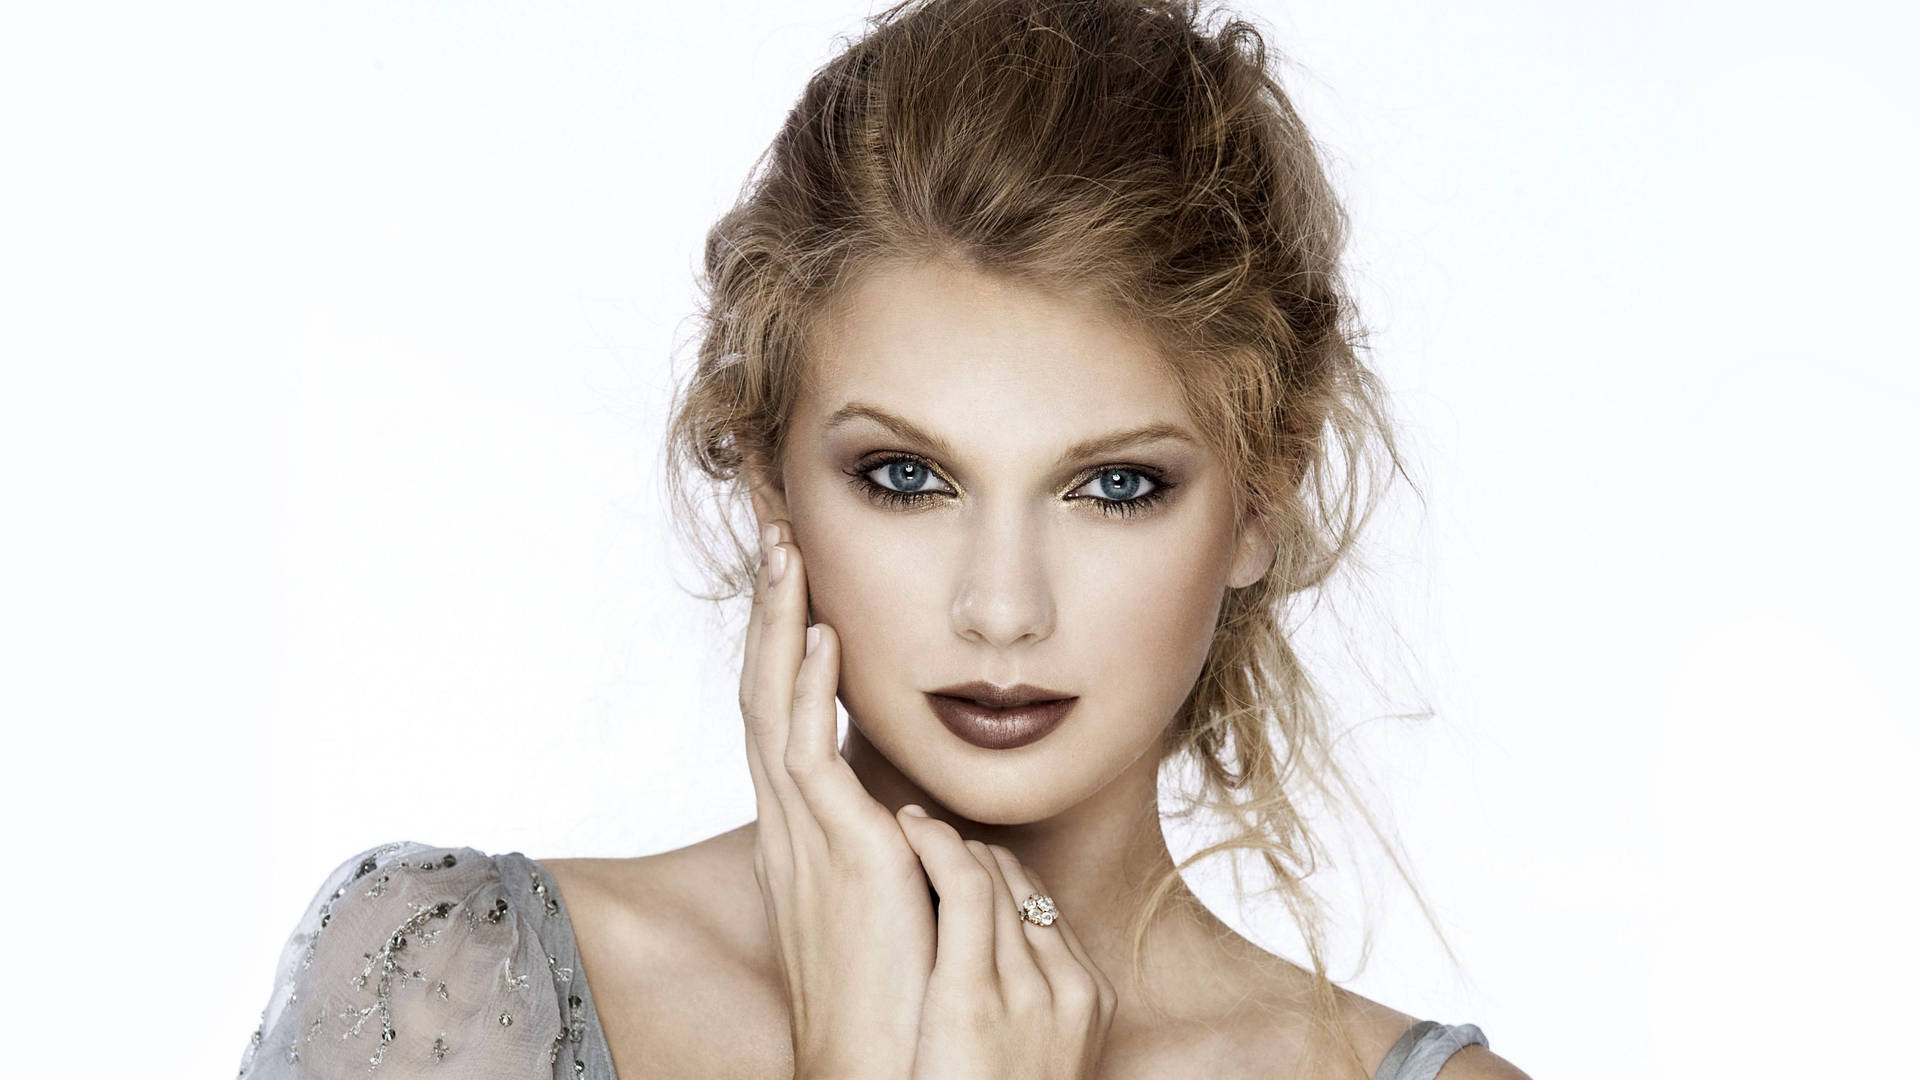 Taylor Swift looking glamorous in a nude makeup look Wallpaper